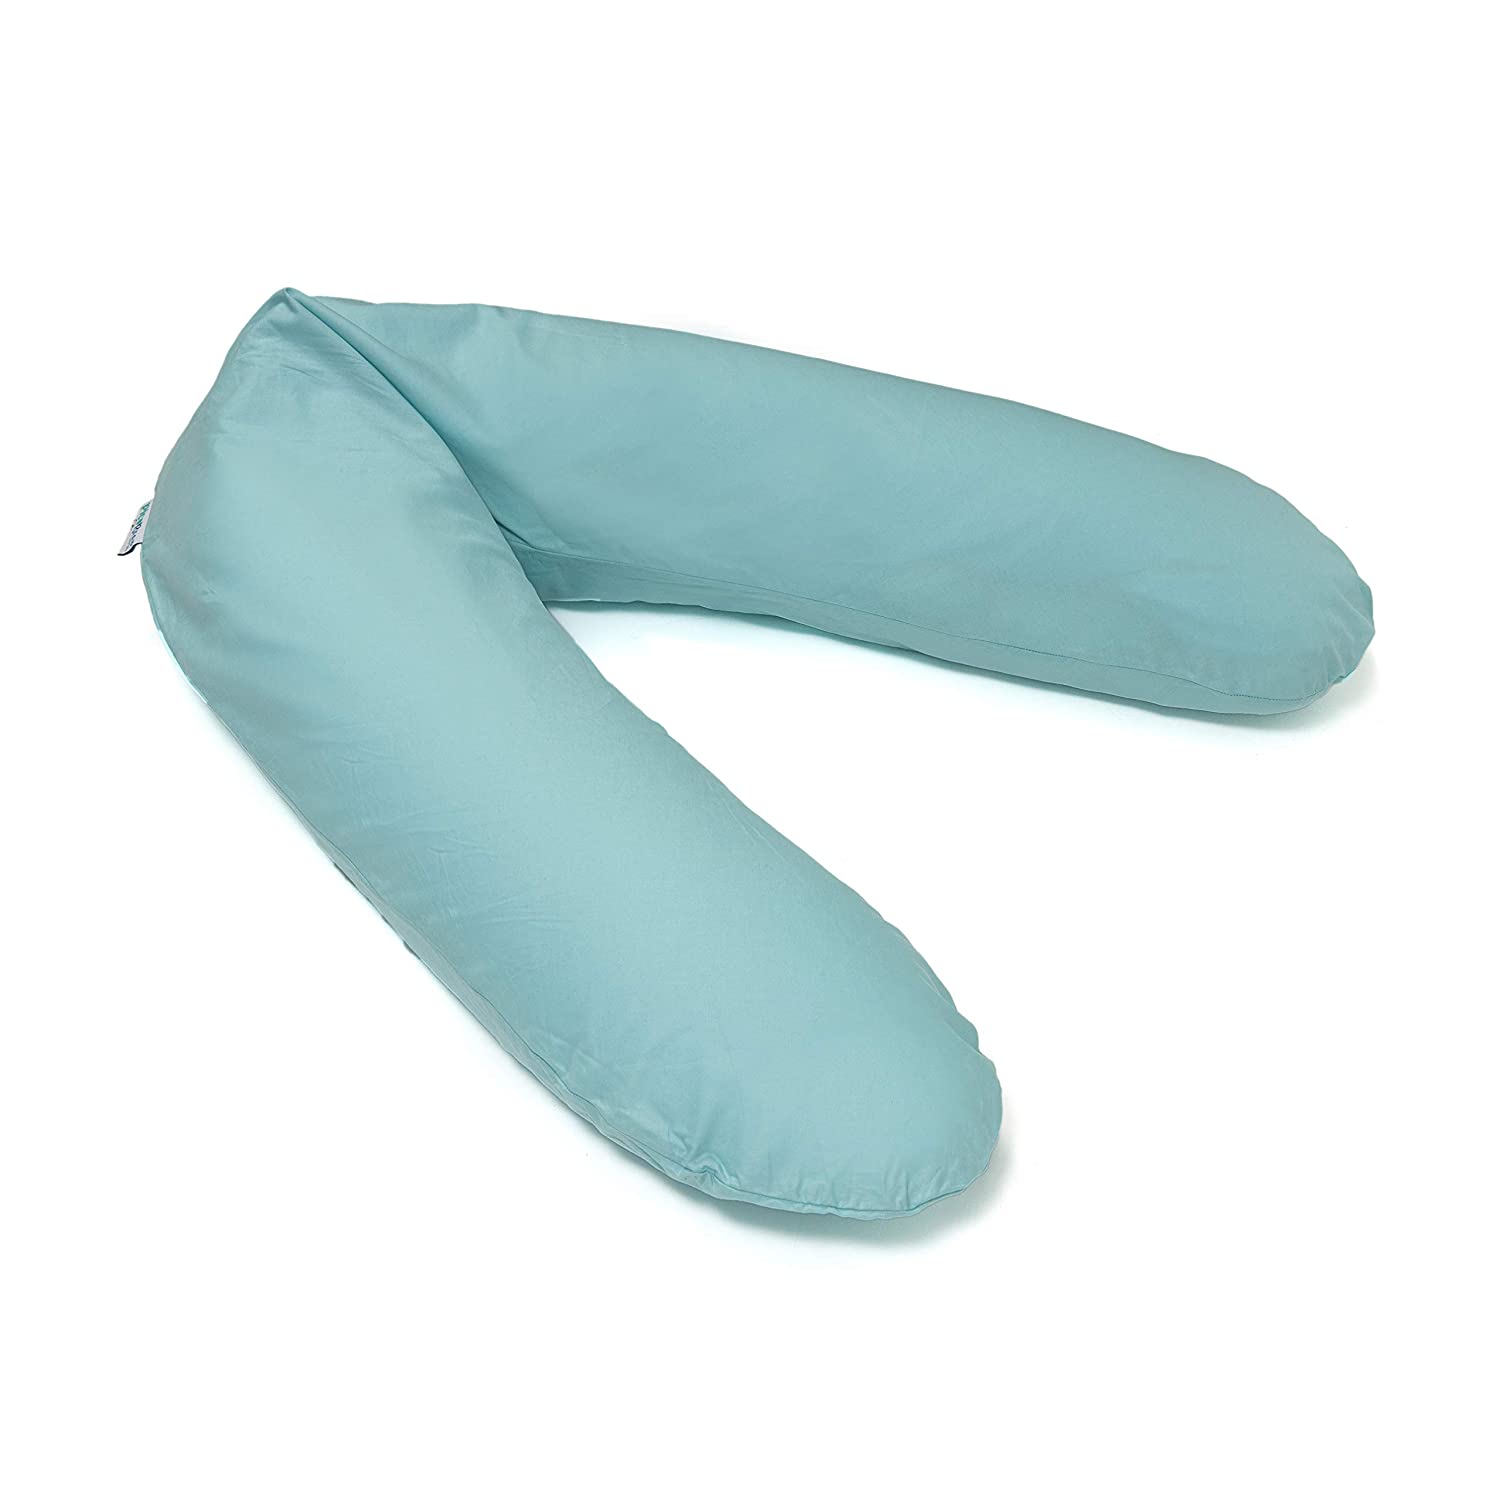 Honey Collection Breastfeeding Pillow, Soft and Cuddly EPS, Microbead Filling, Support Pillow, TÜV Certified, 100% Cotton Pregnancy Pillow 190 cm turquoise-blue